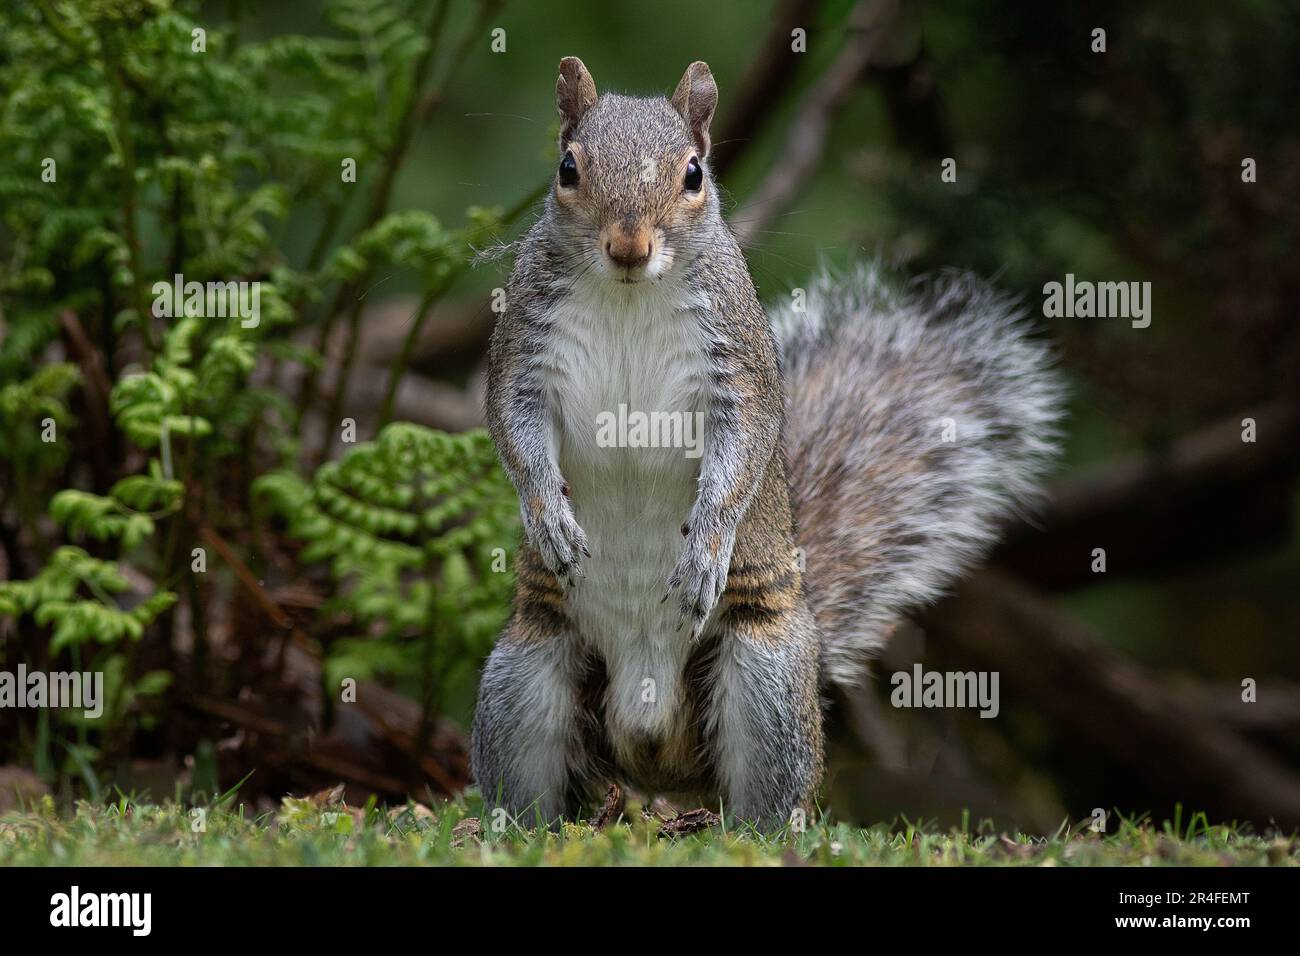 a fun photograph of a grey squirrel as it stands on its back legs and stares at the camera. A blurry background with space for text finishes it. Stock Photo